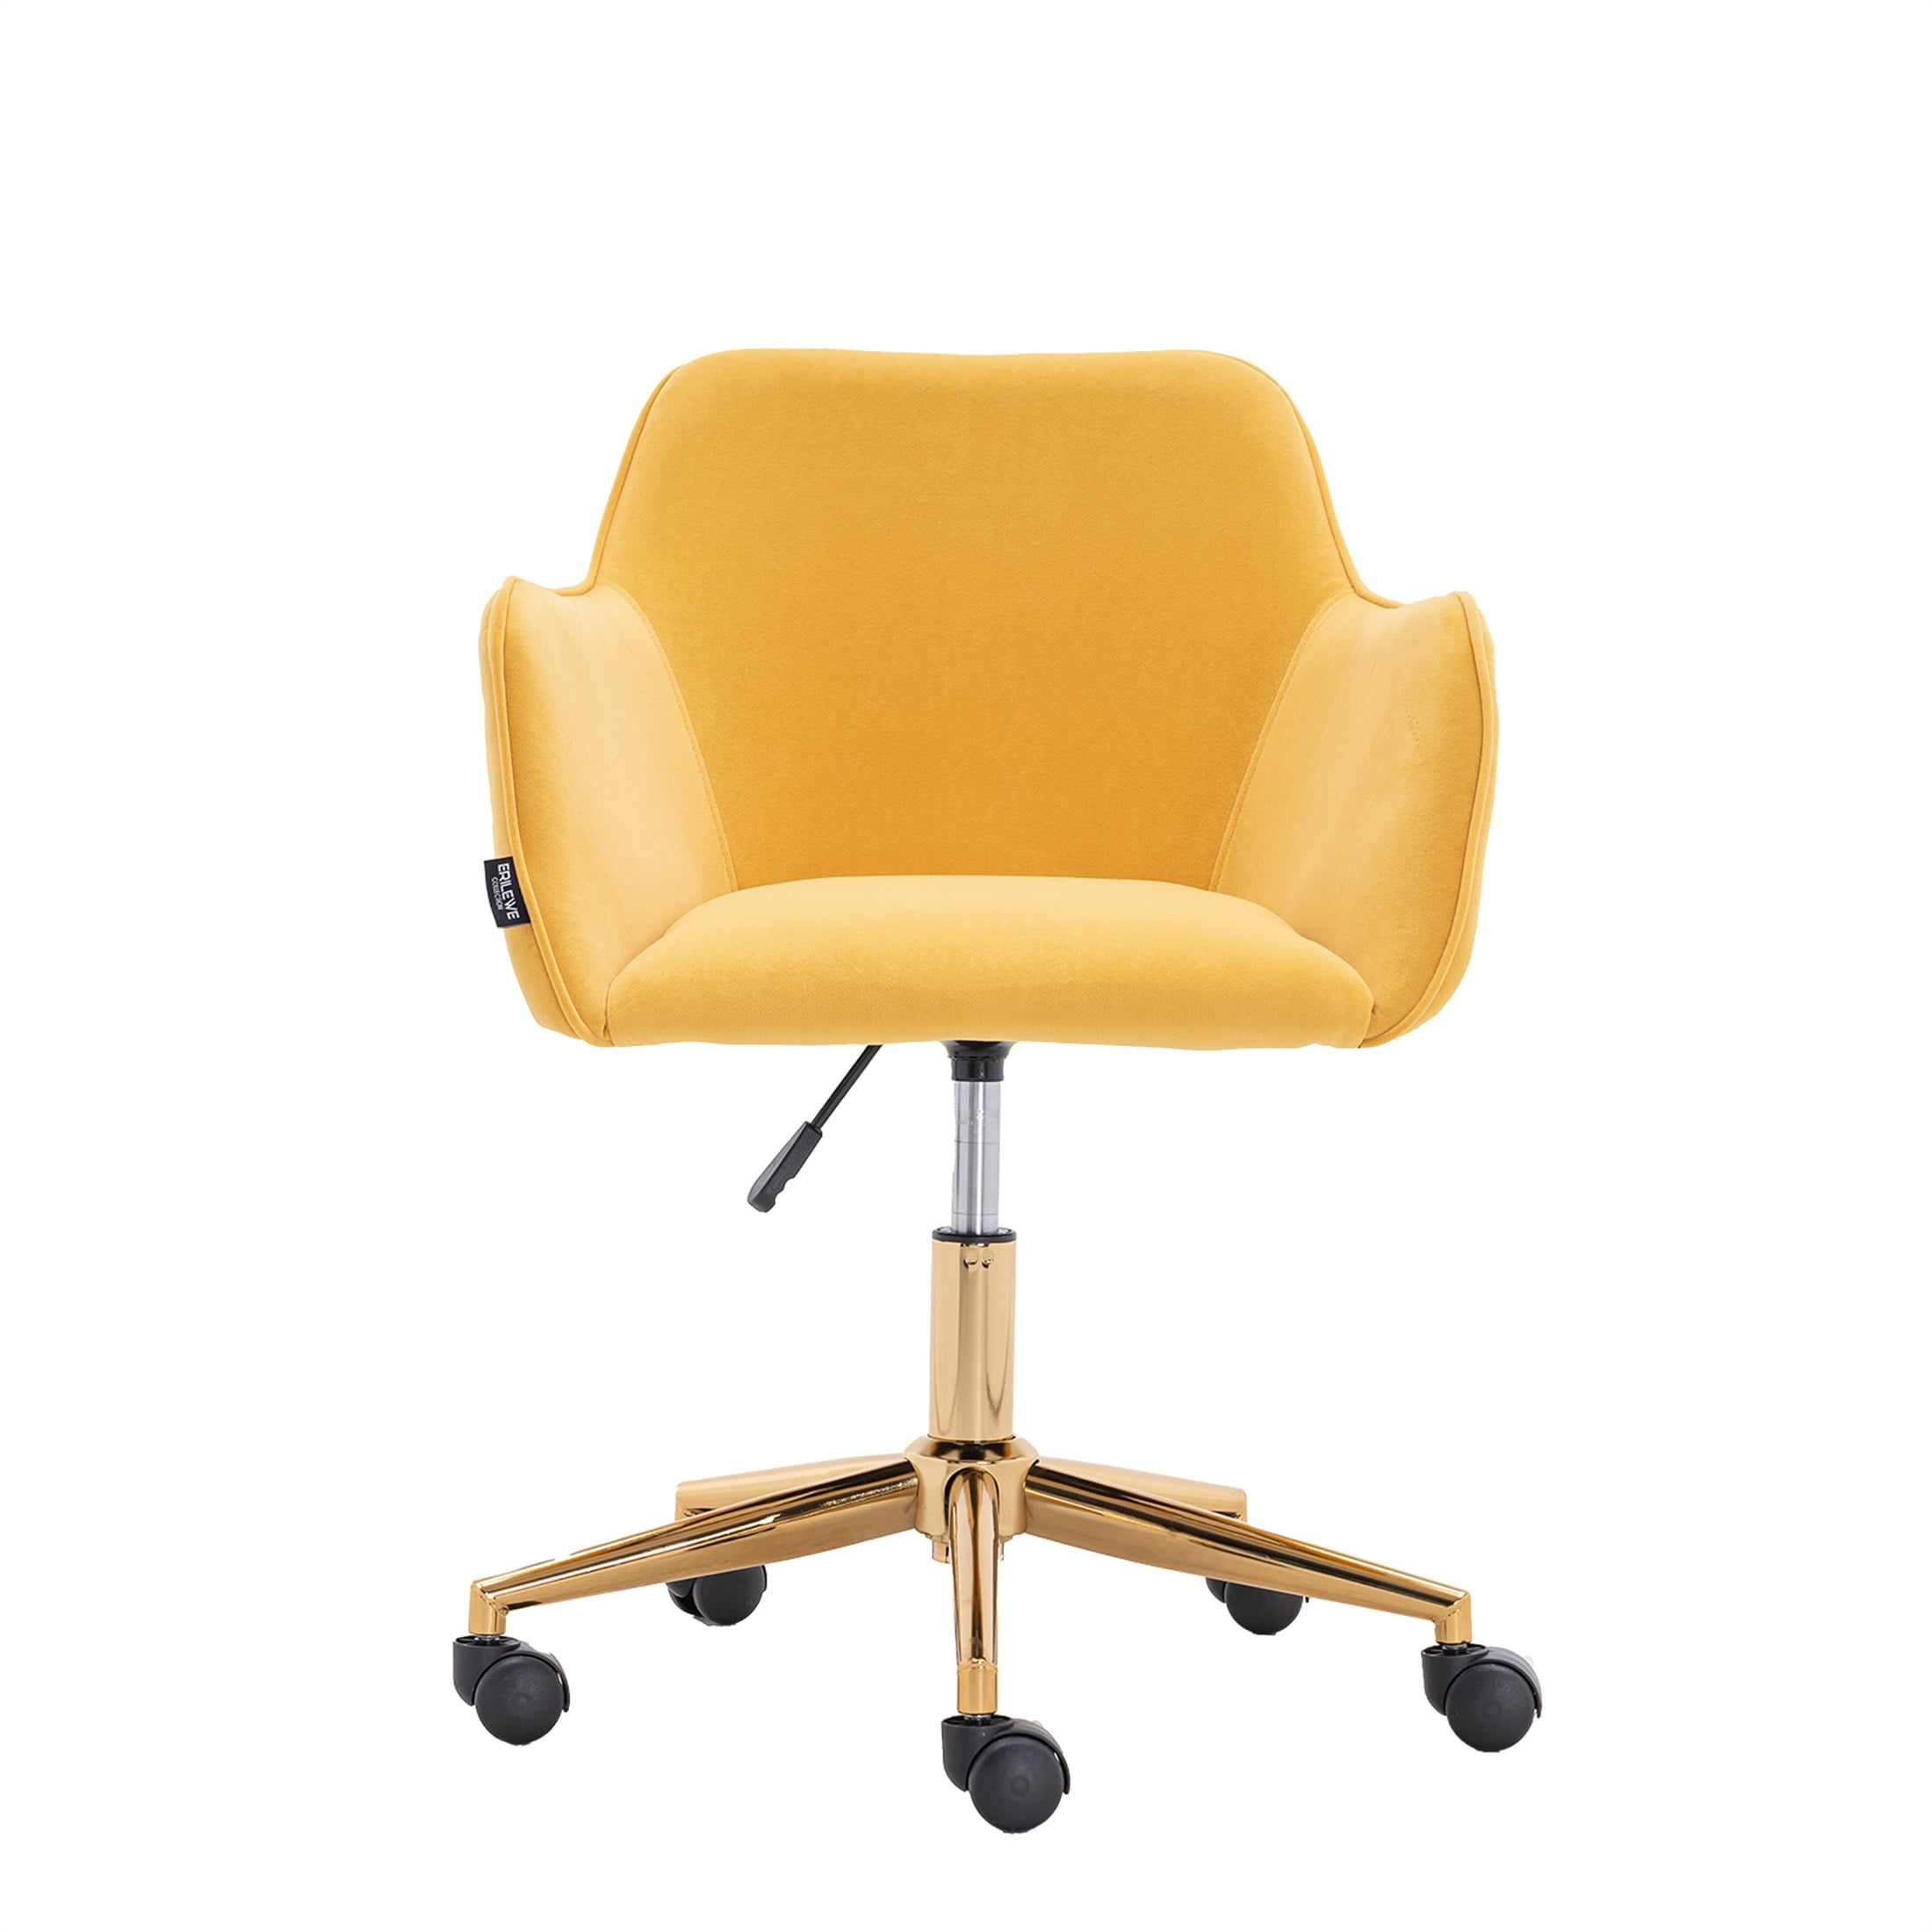 Modern Velvet Fabric Office Chair, Height Adjustable 360 Swivel with Gold Metal Legs and Wheels, Yellow